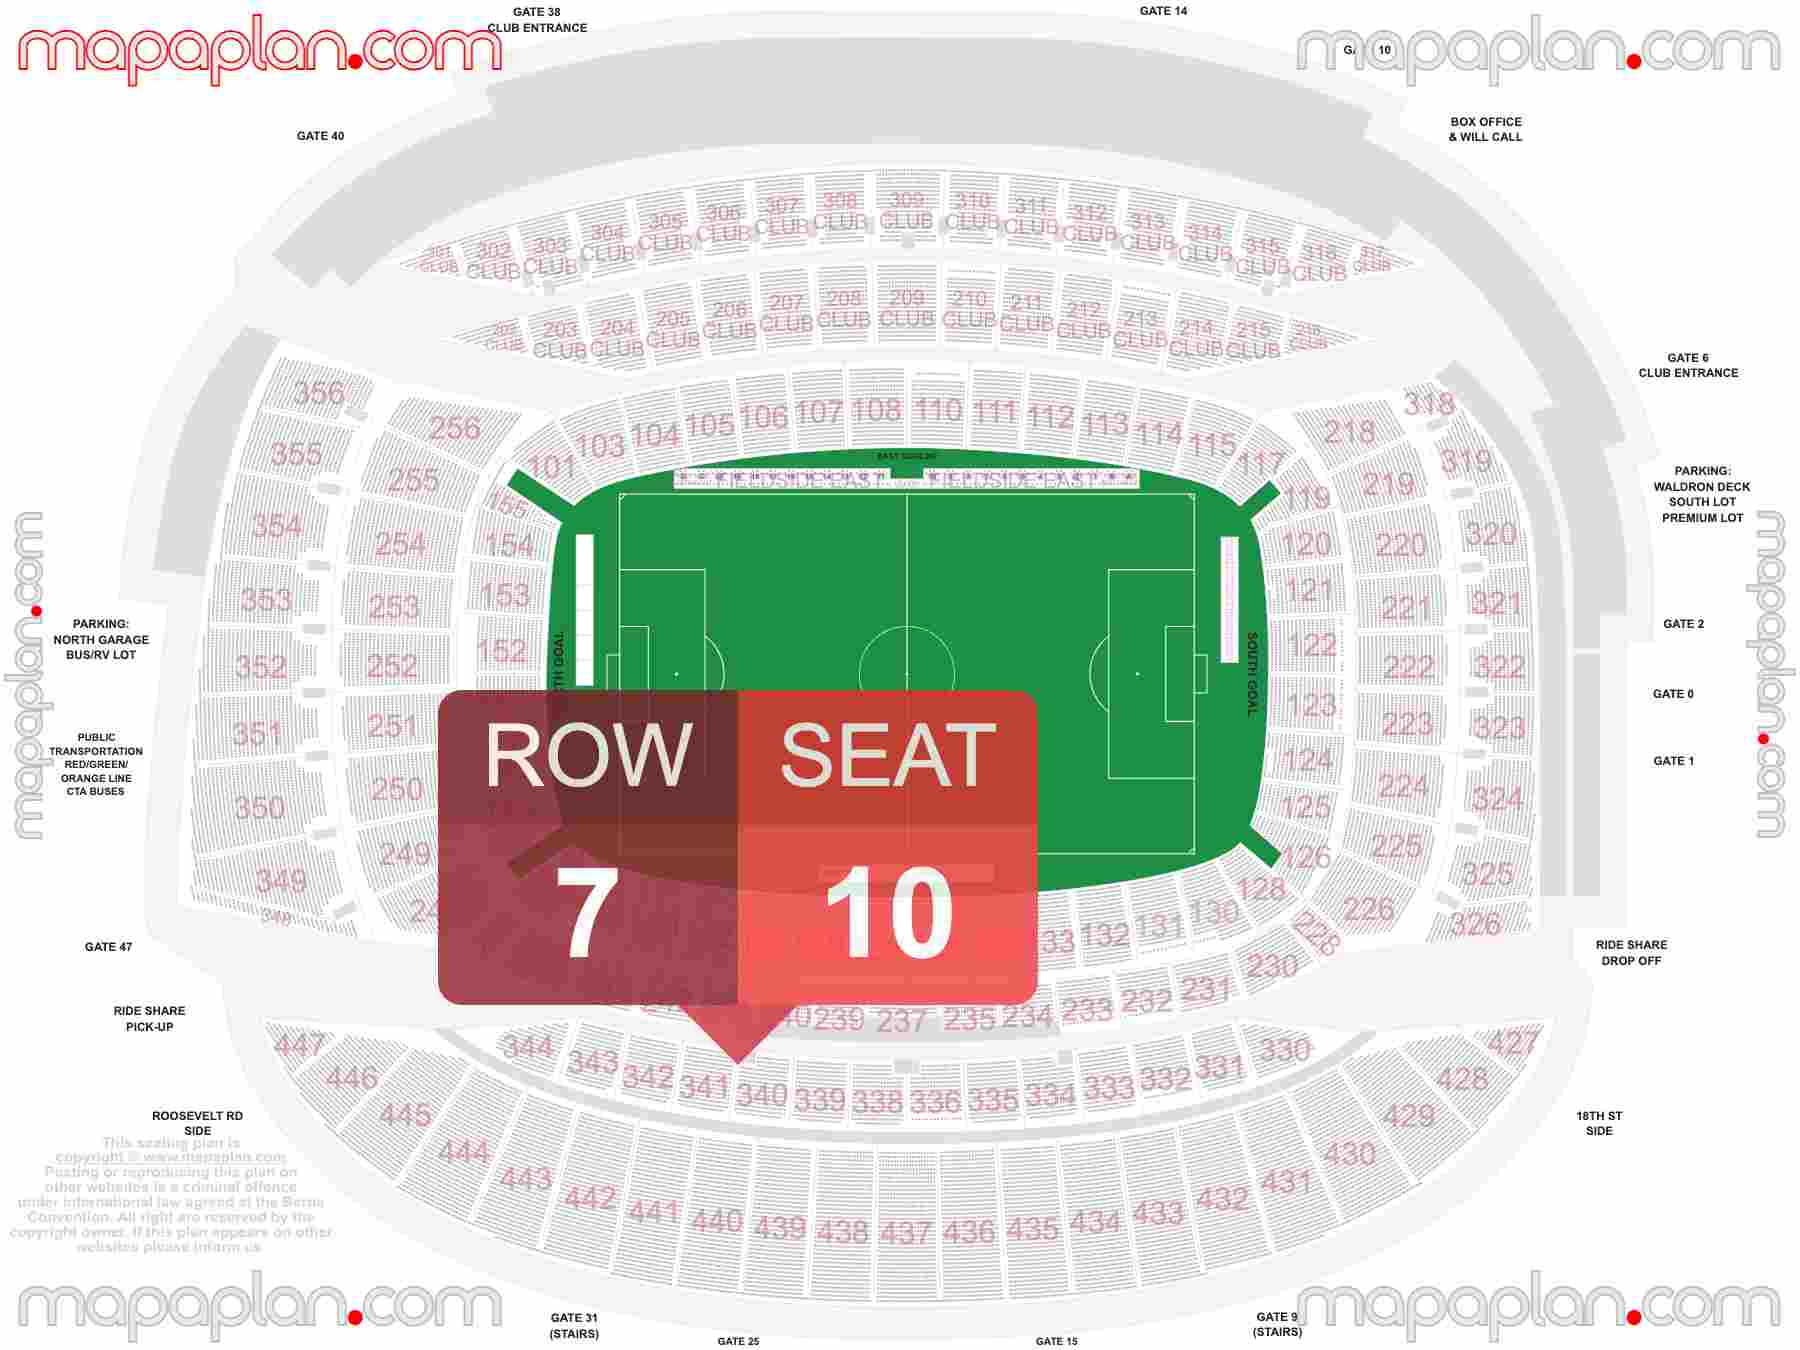 Chicago Soldier Field seating chart Fire FC soccer & Bears football inside capacity view arrangement plan - Interactive virtual 3d best seats & rows detailed stadium image configuration layout